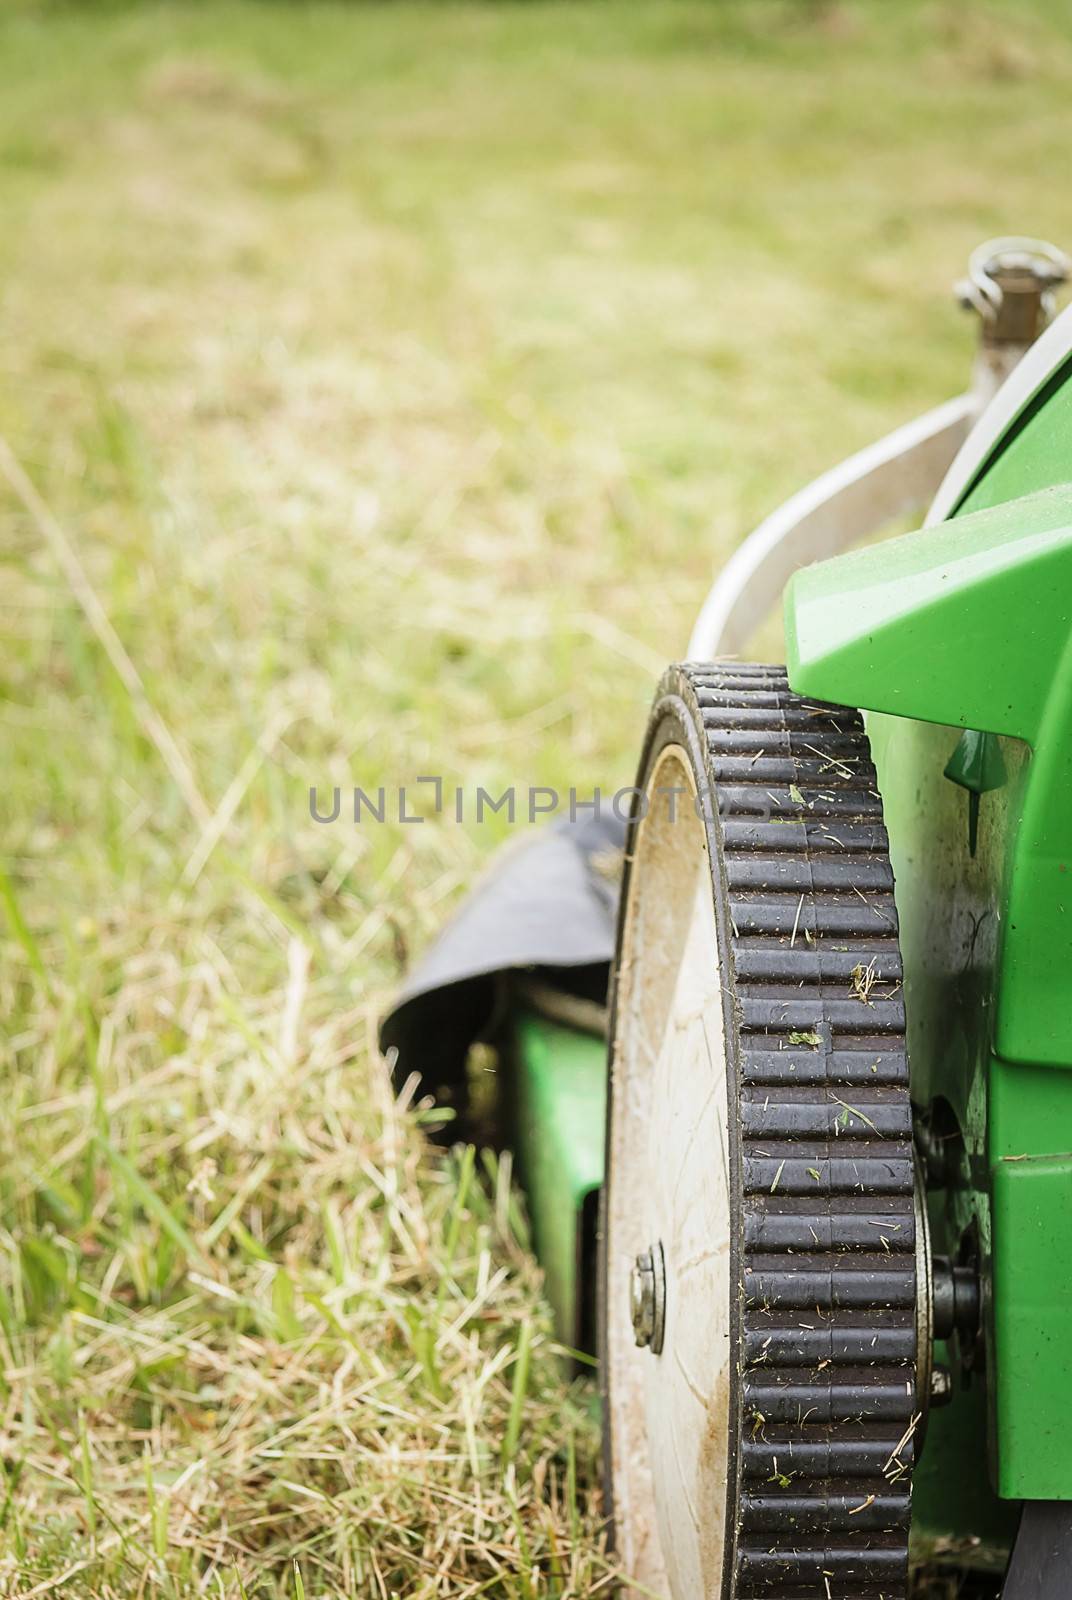 Closeup of lawnmower in the garden ready to cut lawn